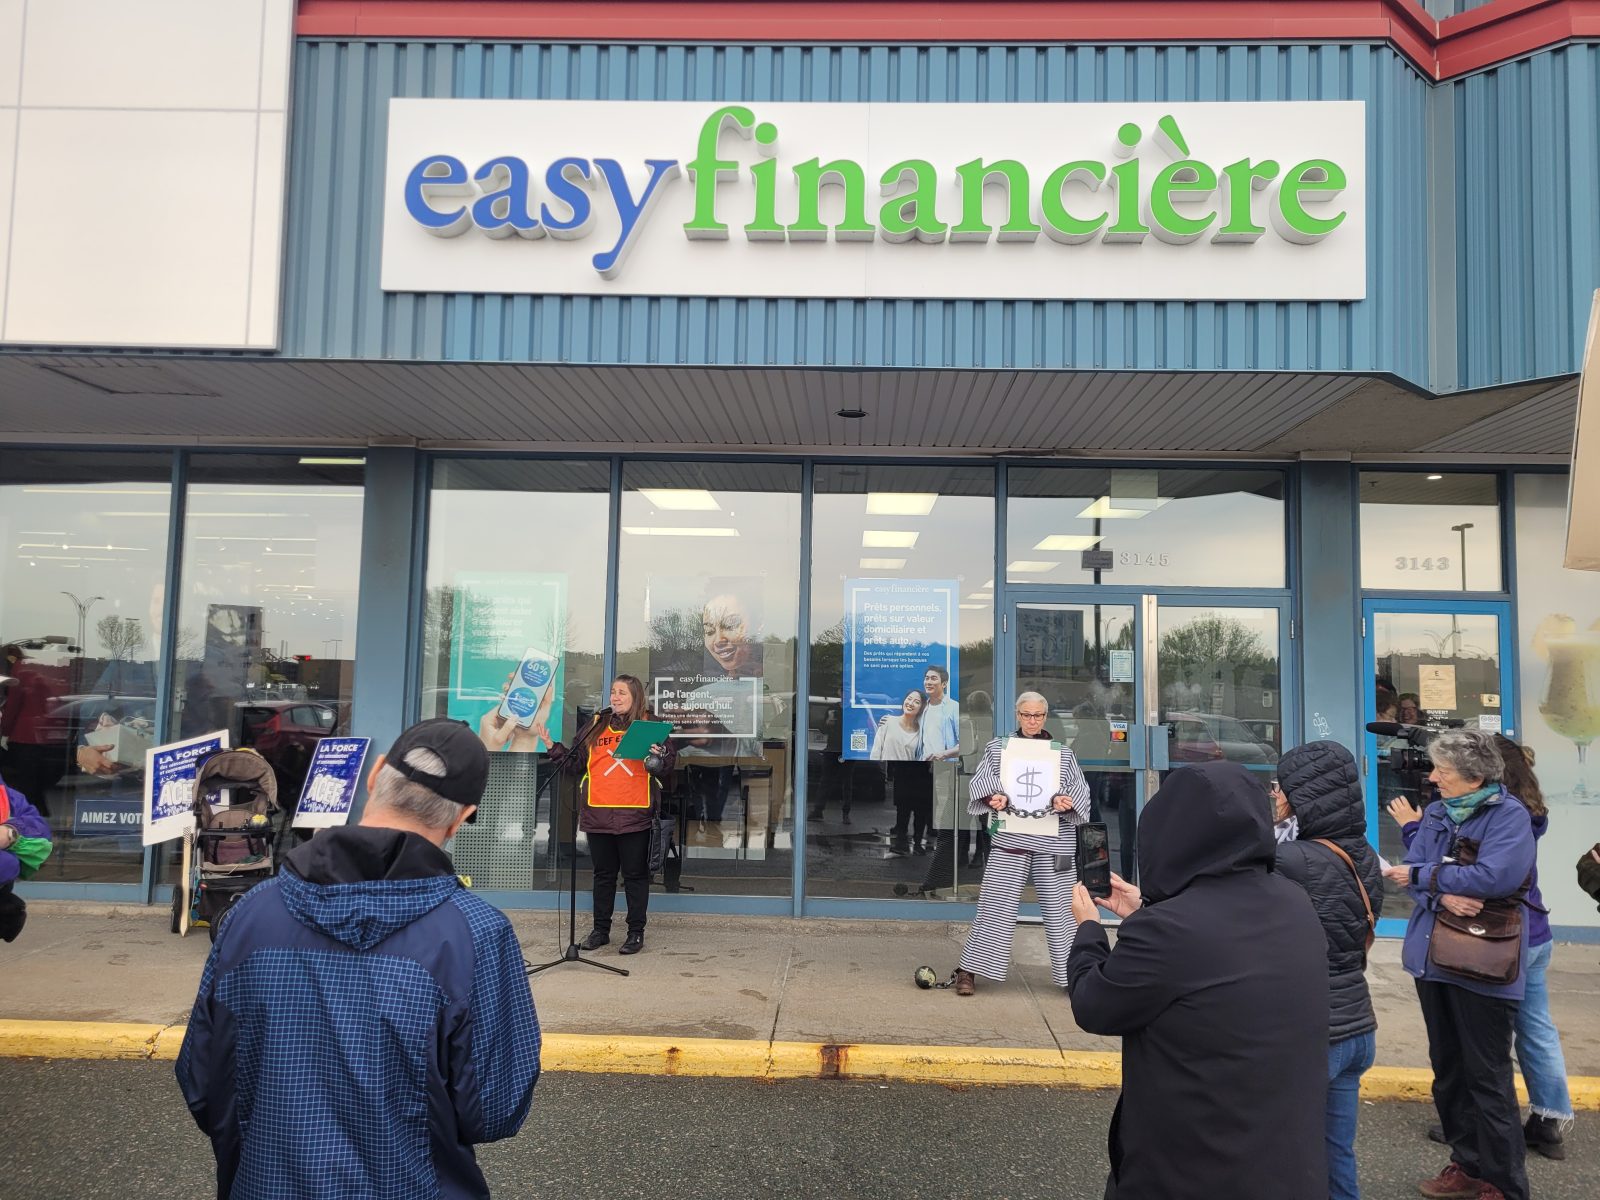 Protesters rally outside easyfinancière in opposition to predatory lending